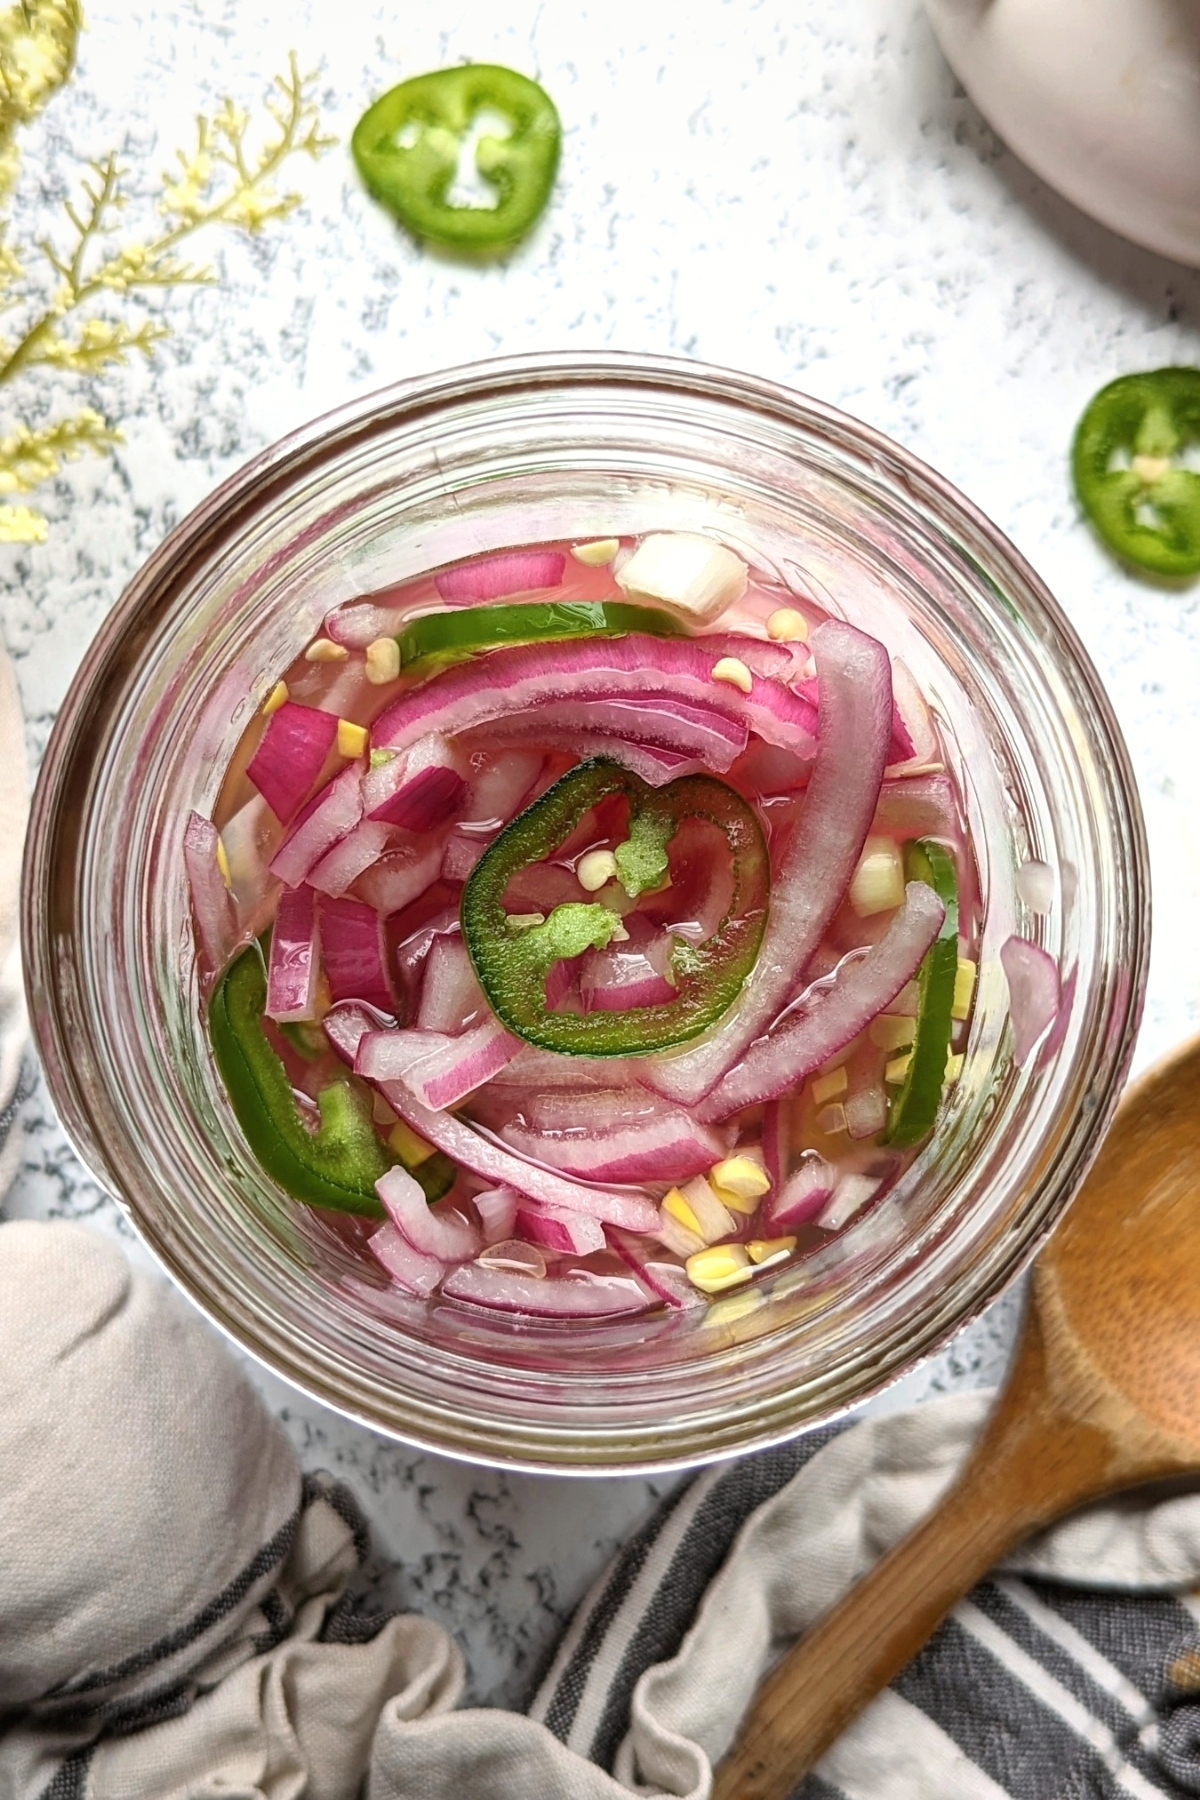 no salt added onion pickles with jalapeno peppers white vinegar and garlic powder